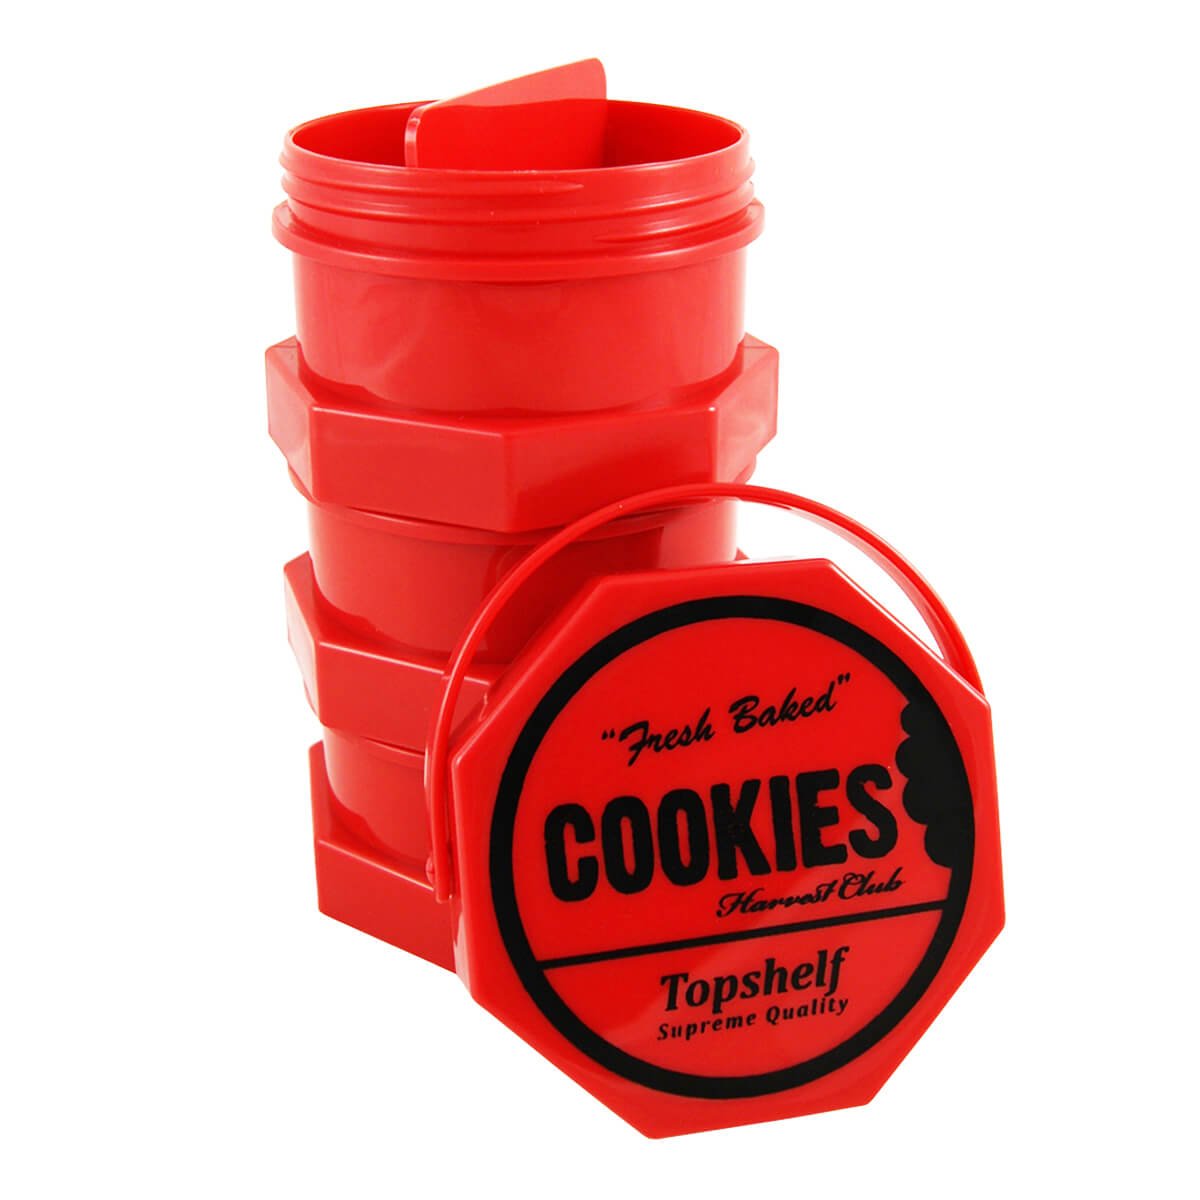 https://d30qj4y22qnbc7.cloudfront.net/wp-content/uploads/2020/10/wholesale-cookies-red-stacked-plastic-containers-3.jpg